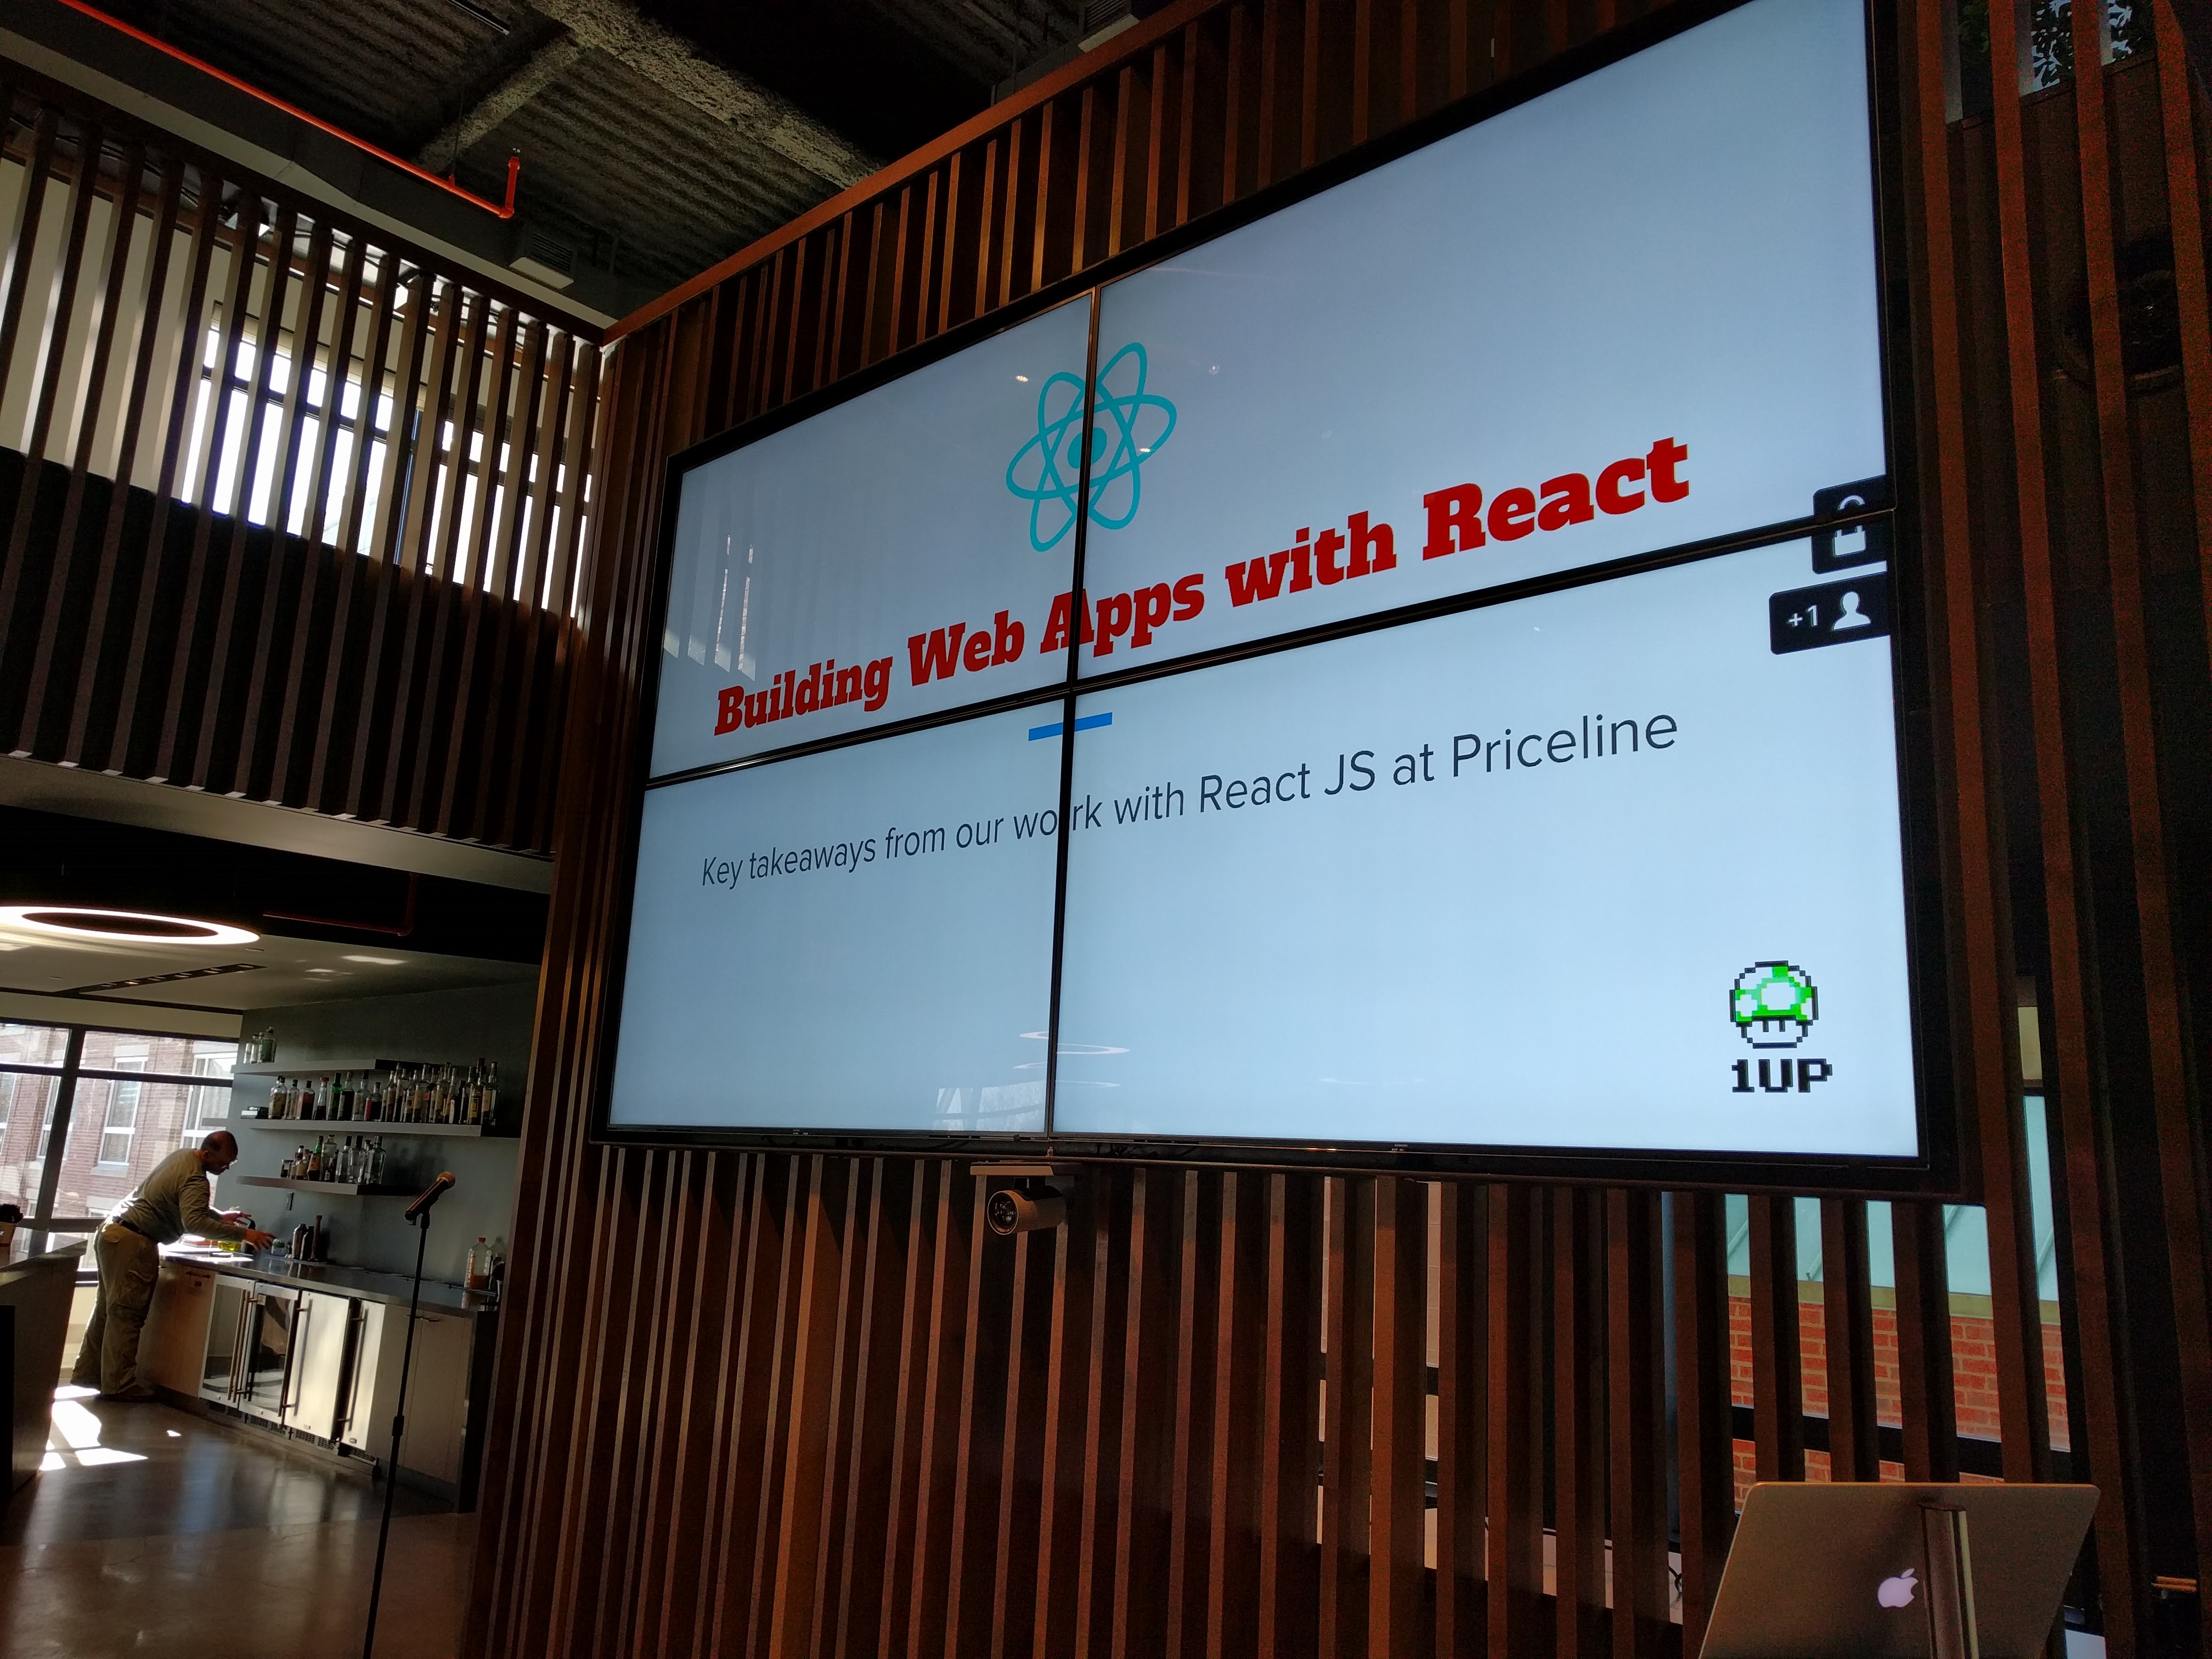 The cover slide from my tech talk on React.js